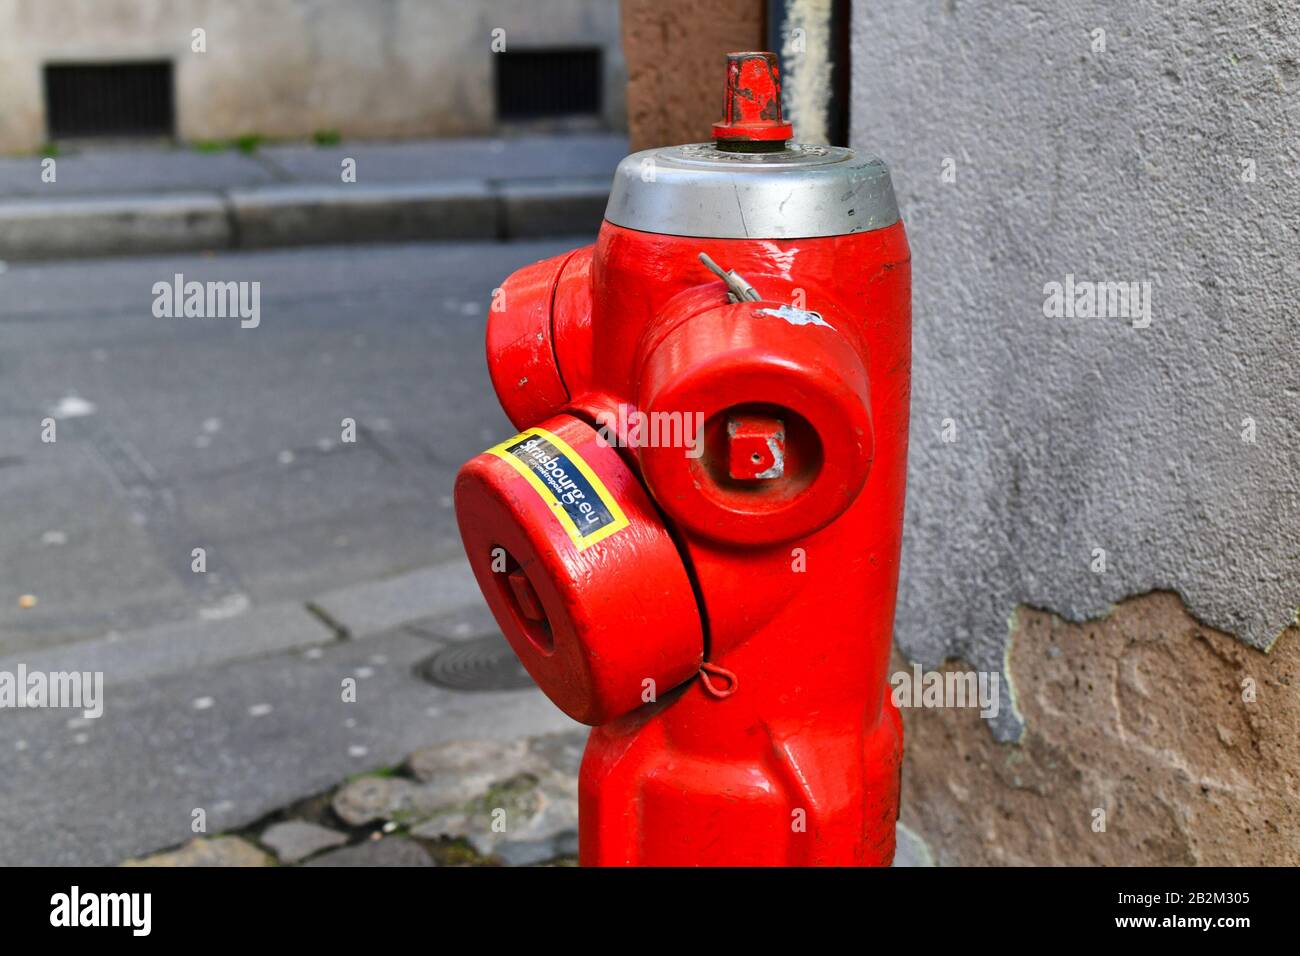 Strasbourg, France - February 2020: Red Fire hydrant with water valves for fire emergencies in street Stock Photo